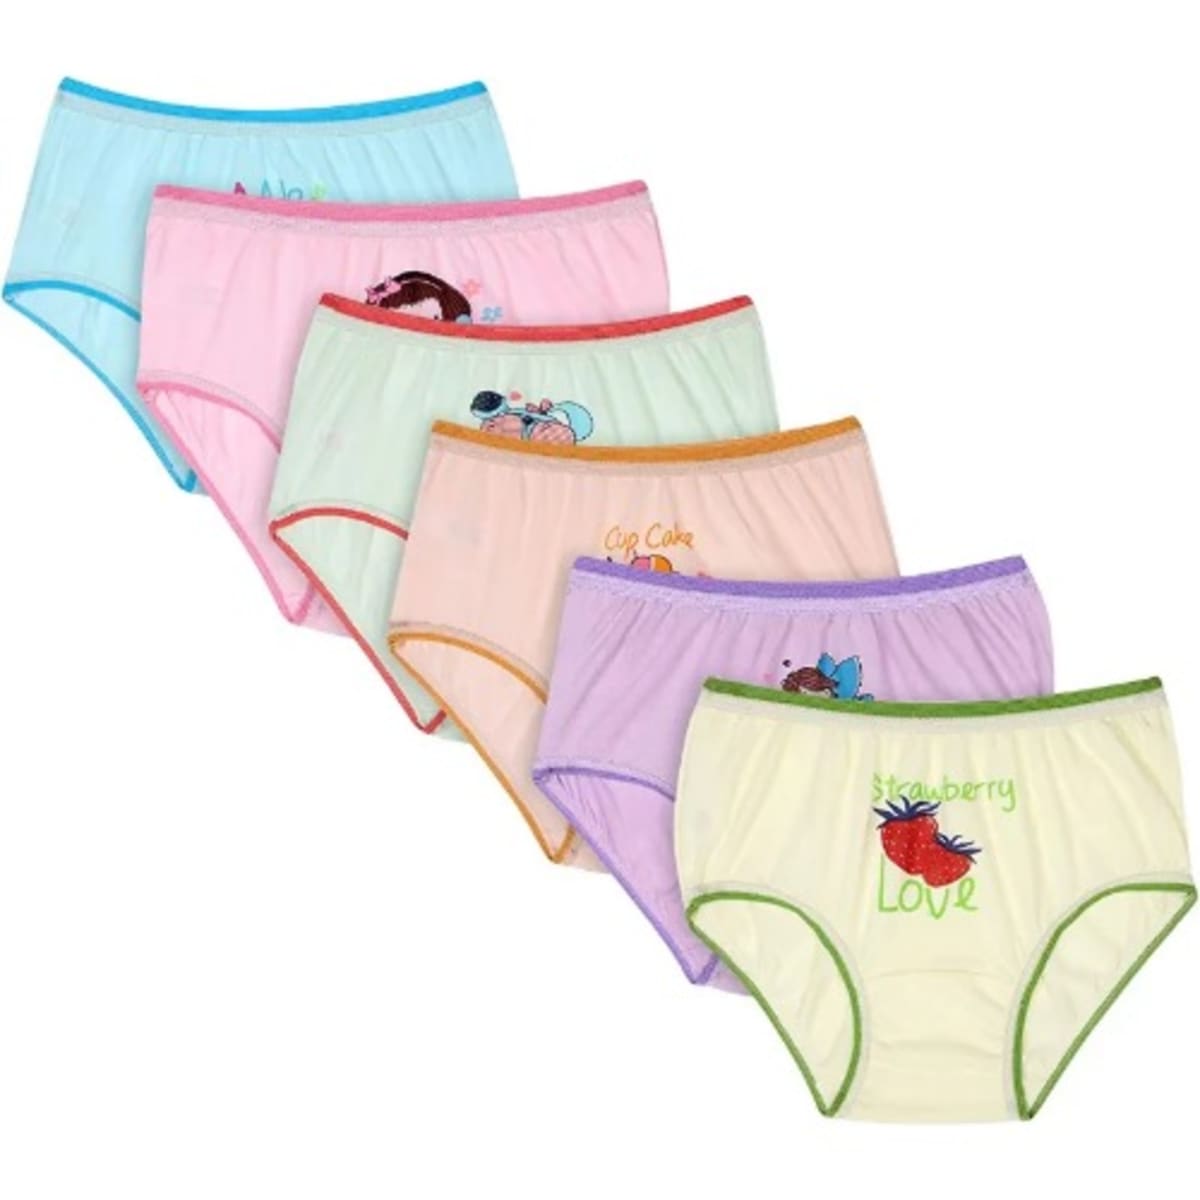 Girls Pants Briefs - Pack Of 6